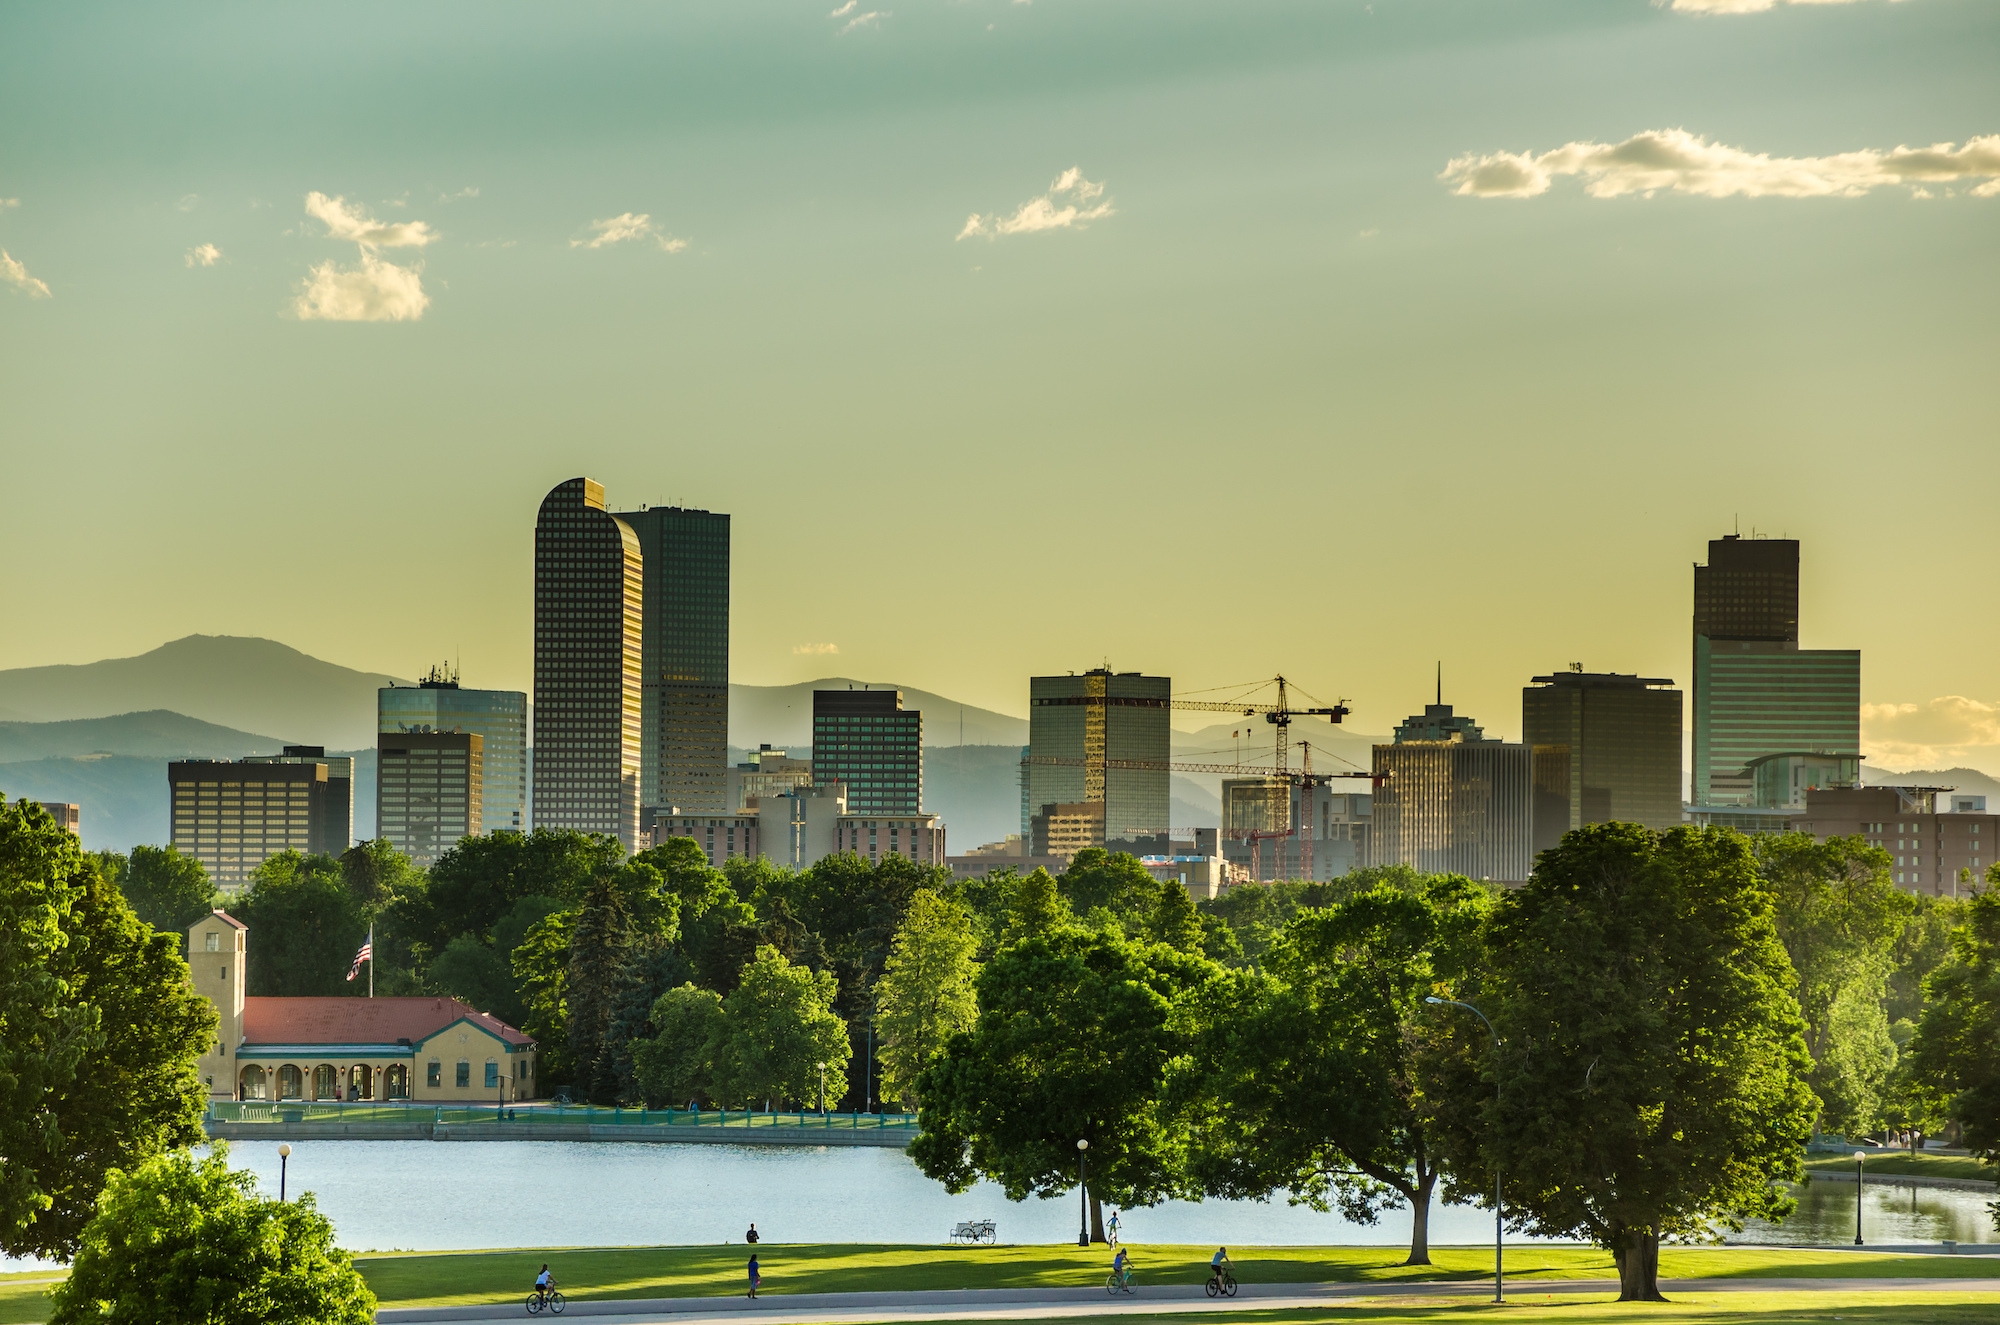 A photo of the Denver skyline is shown.